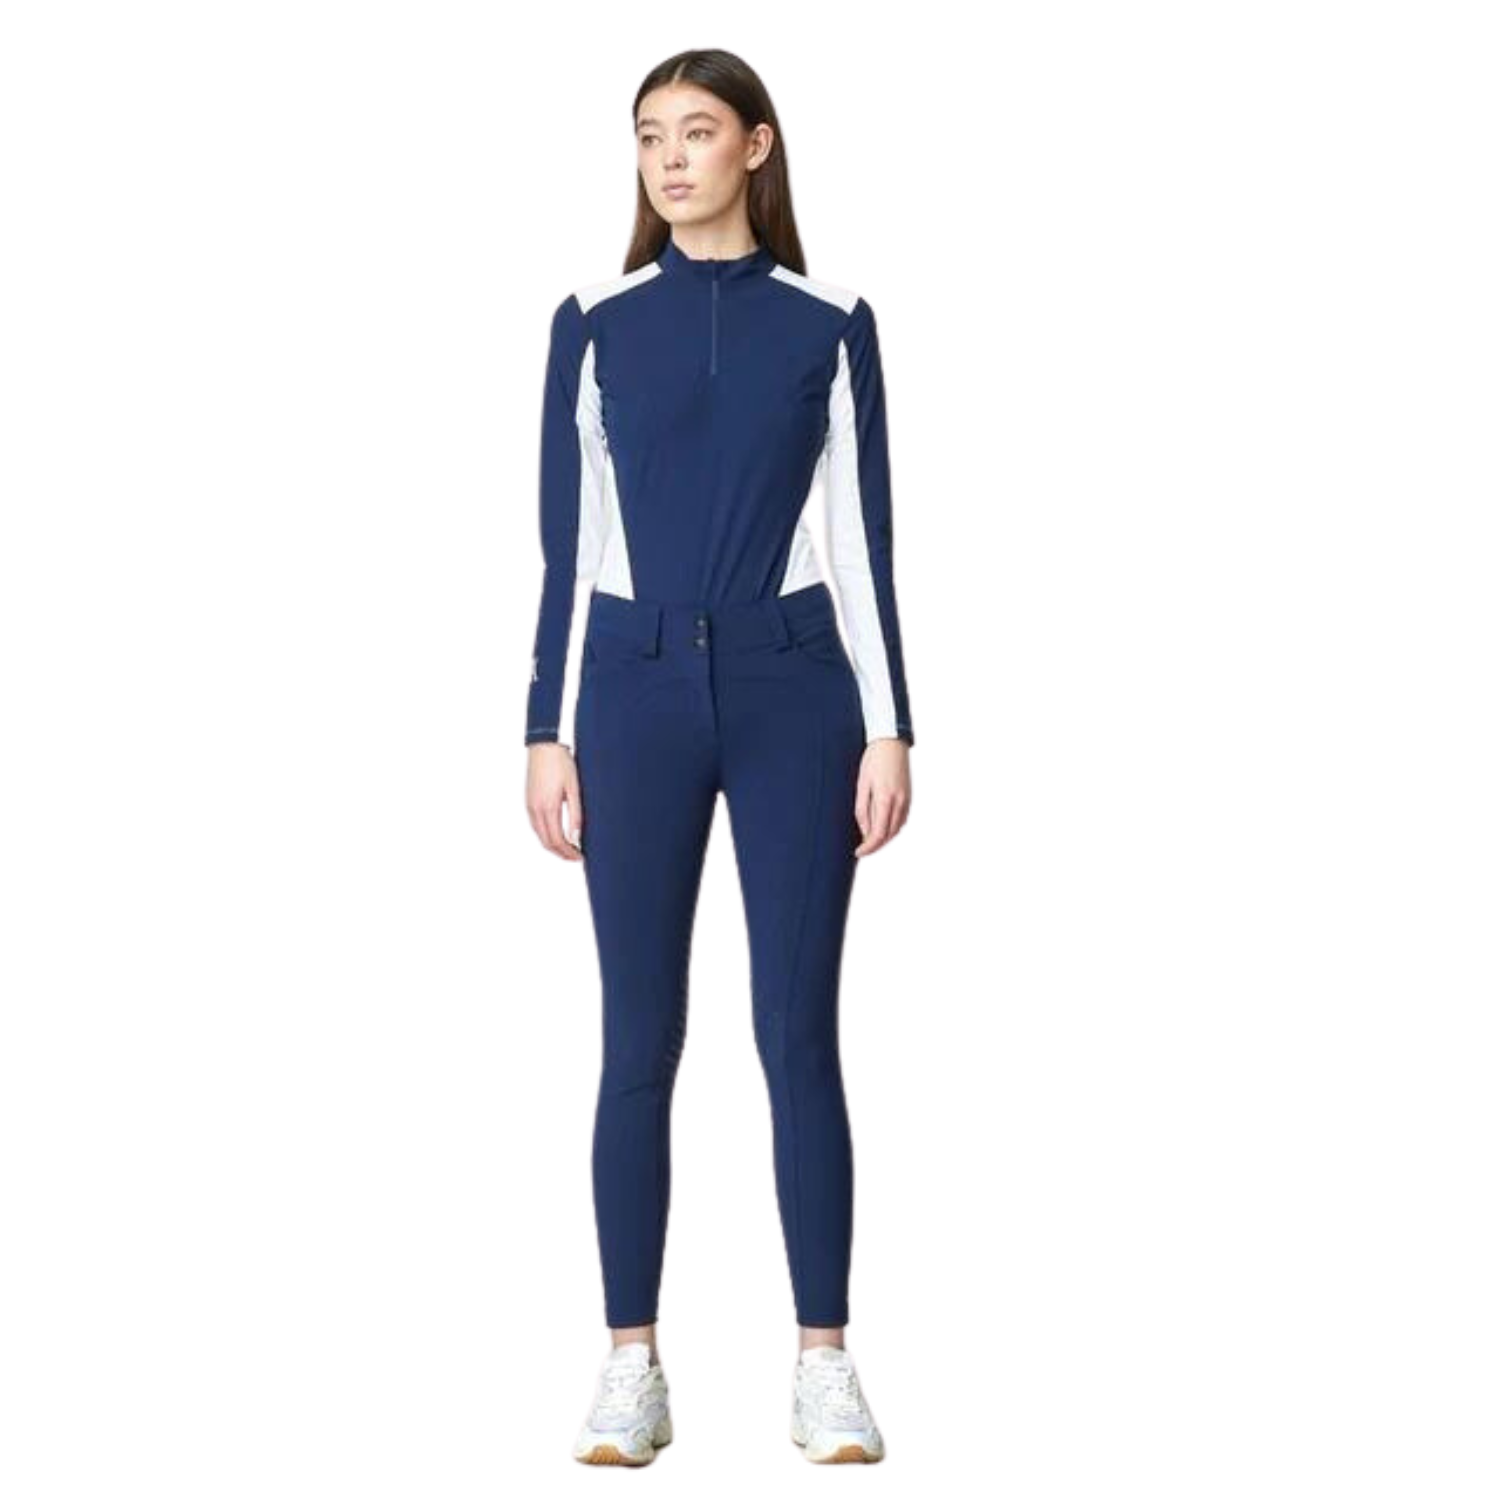 Ladies Compression High Rise Performance Knee Grip Breeches - Navy